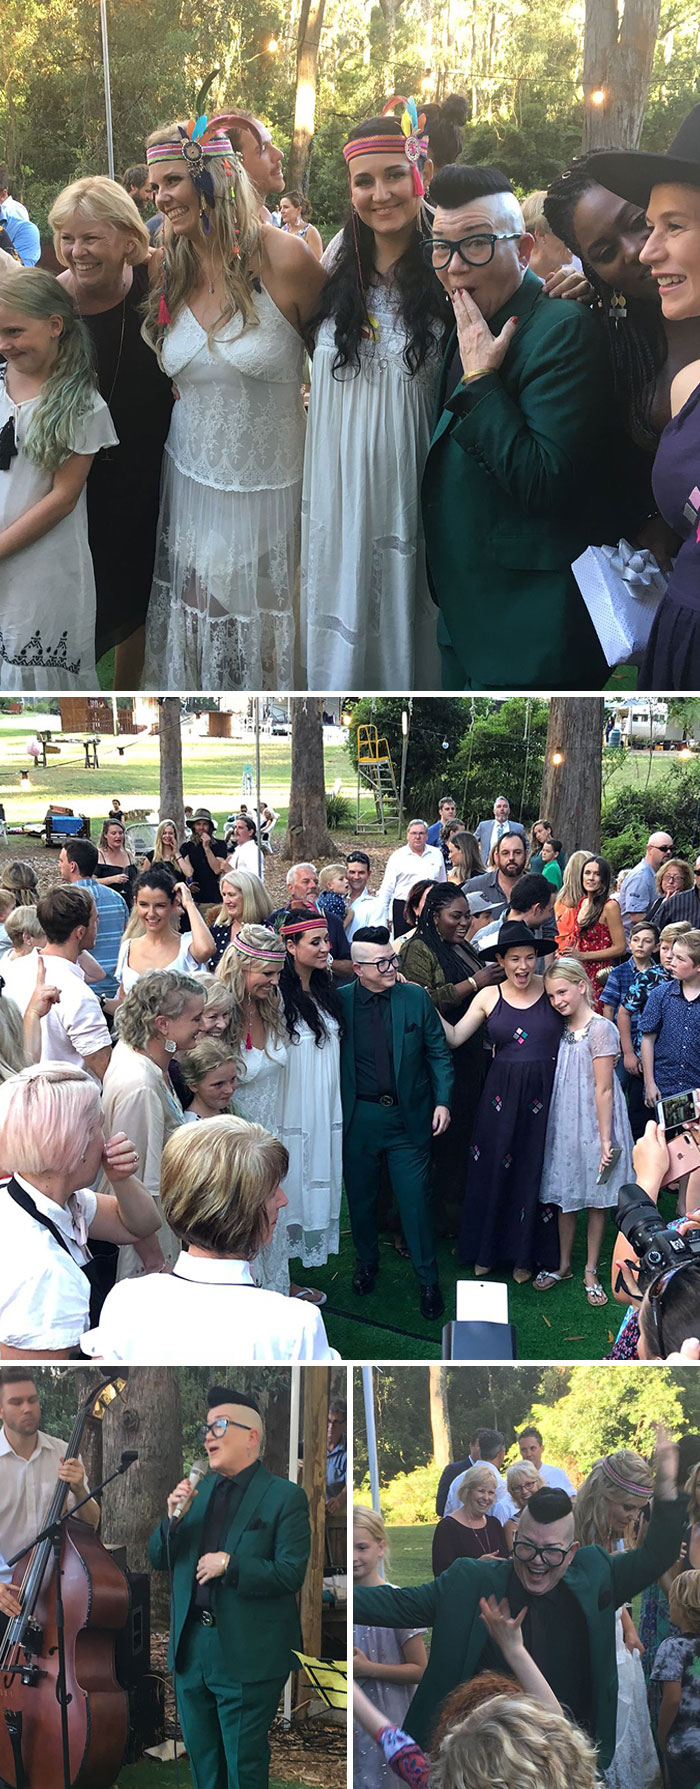 The Orange Is The New Black Star Crashed A Wedding While In Australia With Two Of Her Oitnb Co-Stars: Yael Stone (Lorna Morello) And Danielle Brooks (Taystee)